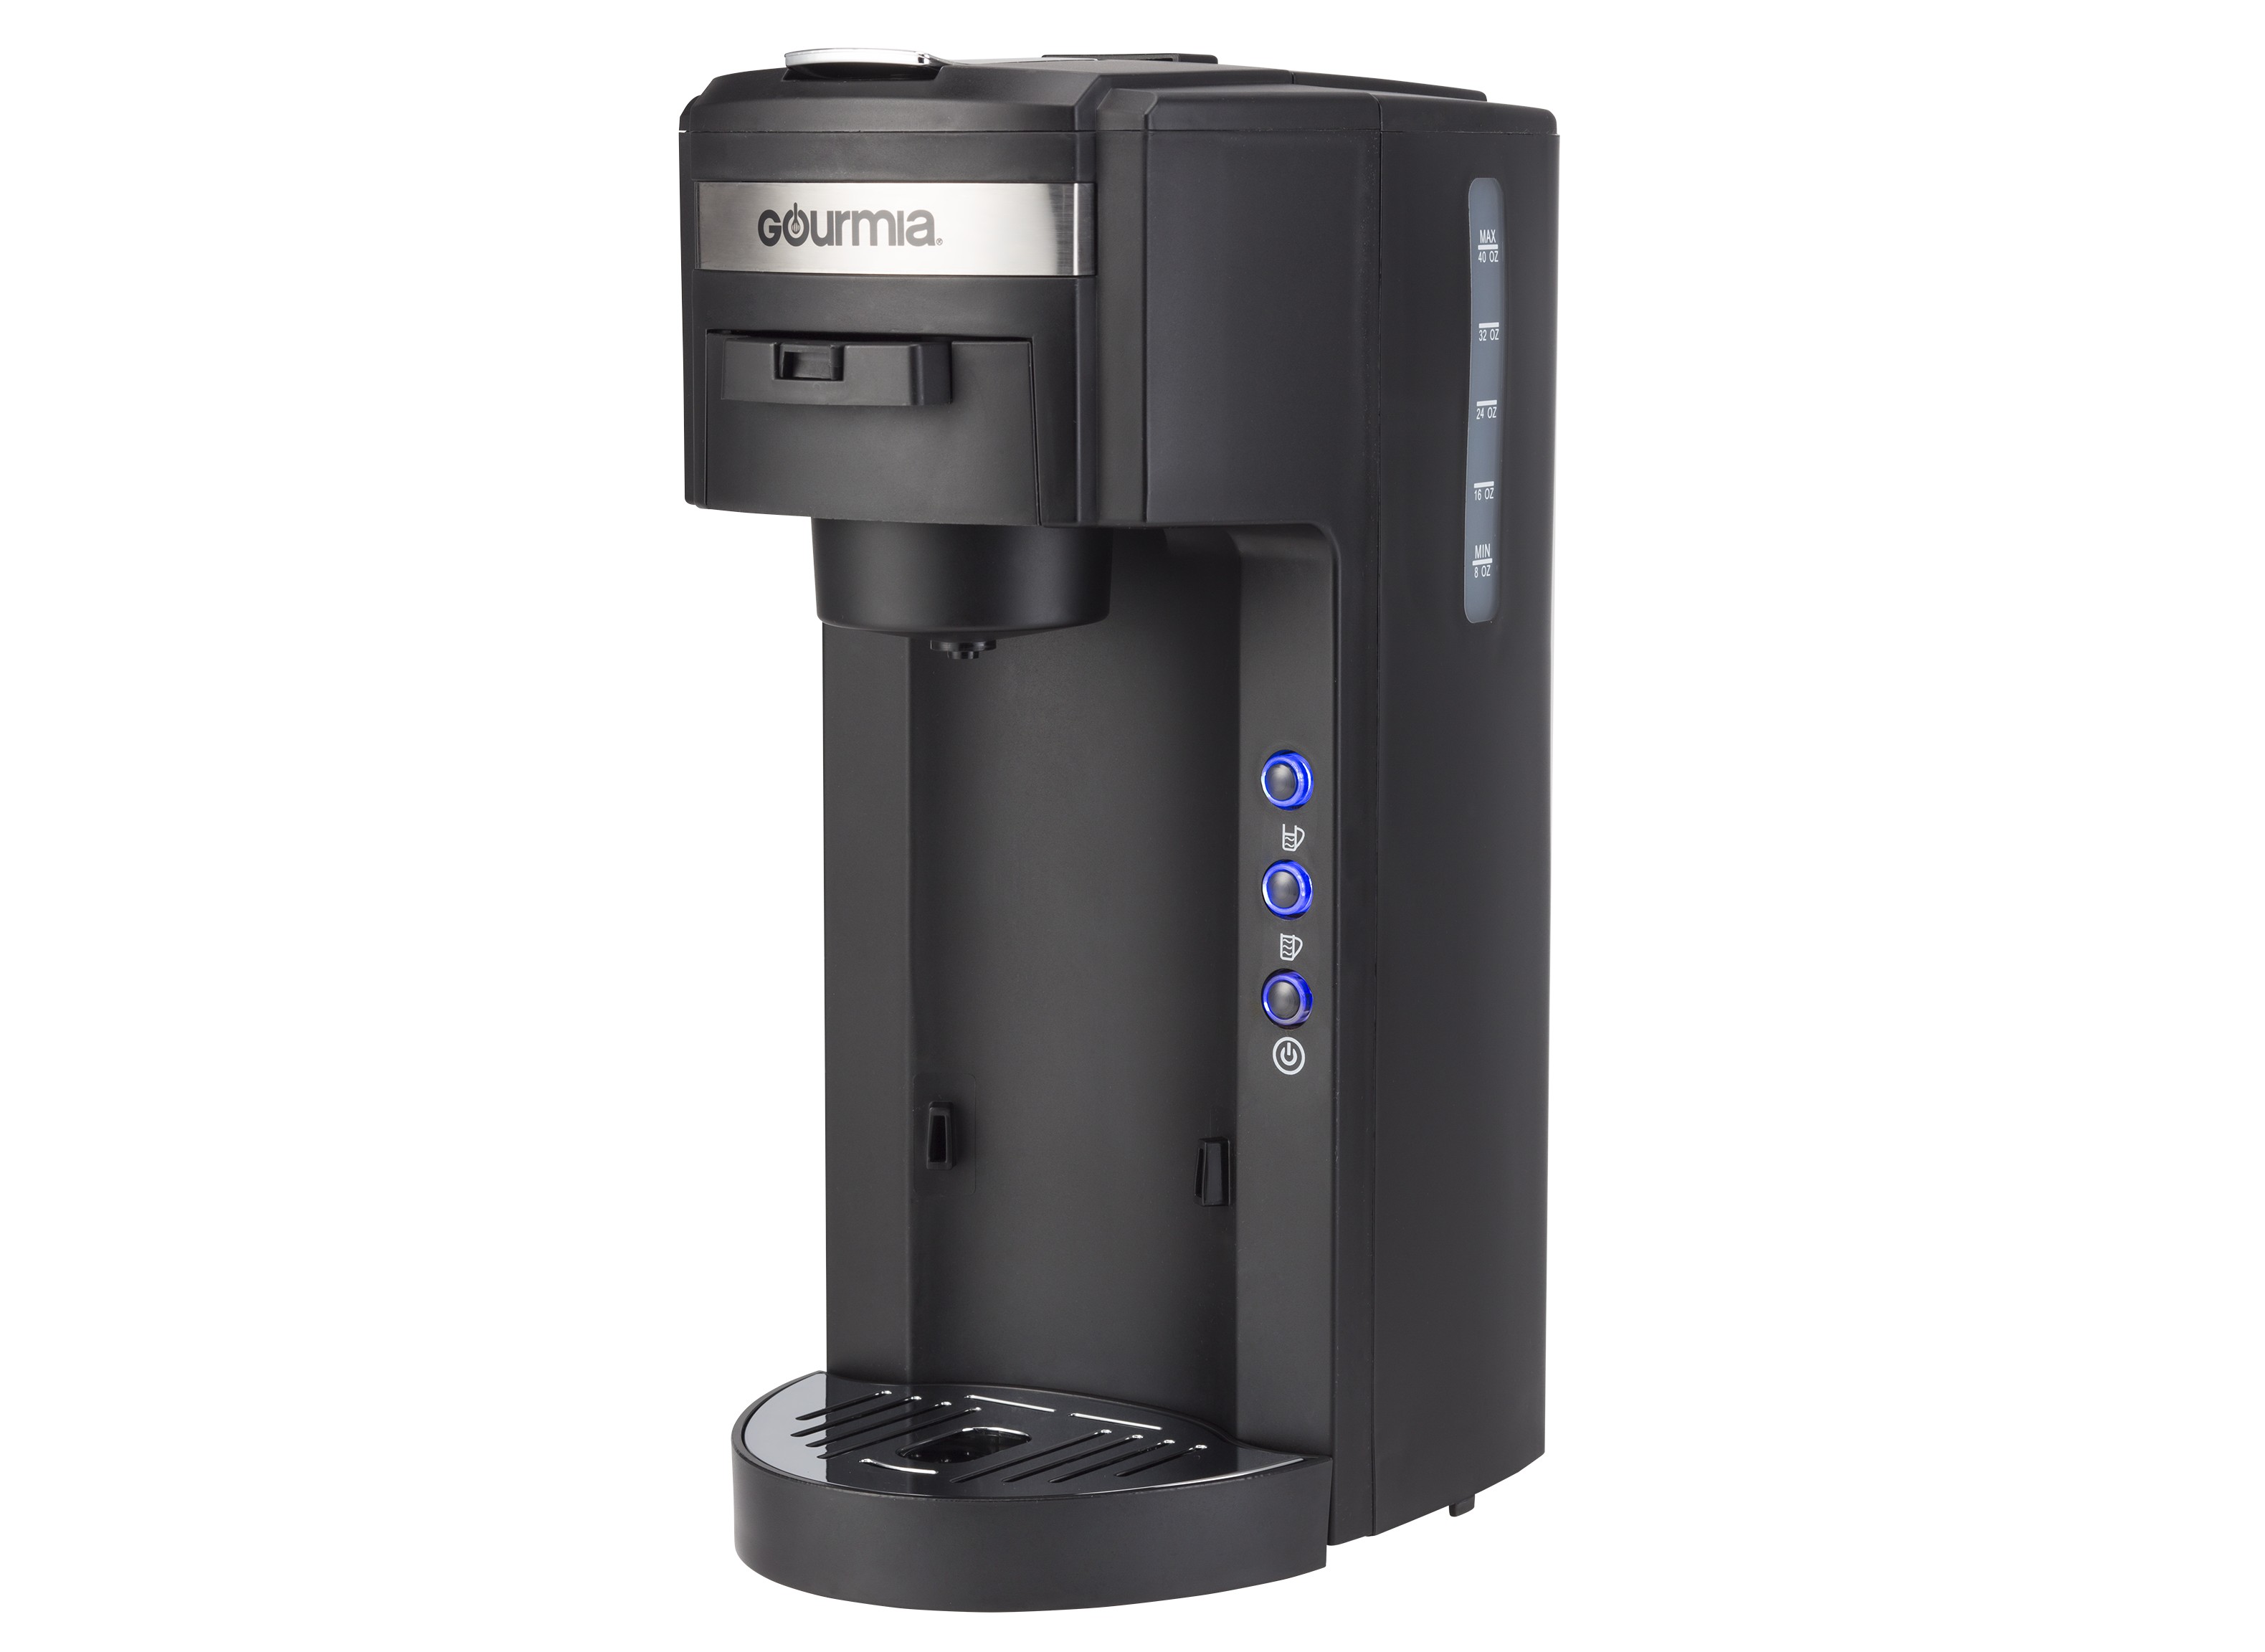 https://crdms.images.consumerreports.org/prod/products/cr/models/388513-coffeemakers-gourmia-gc150javamaster2in1.jpg